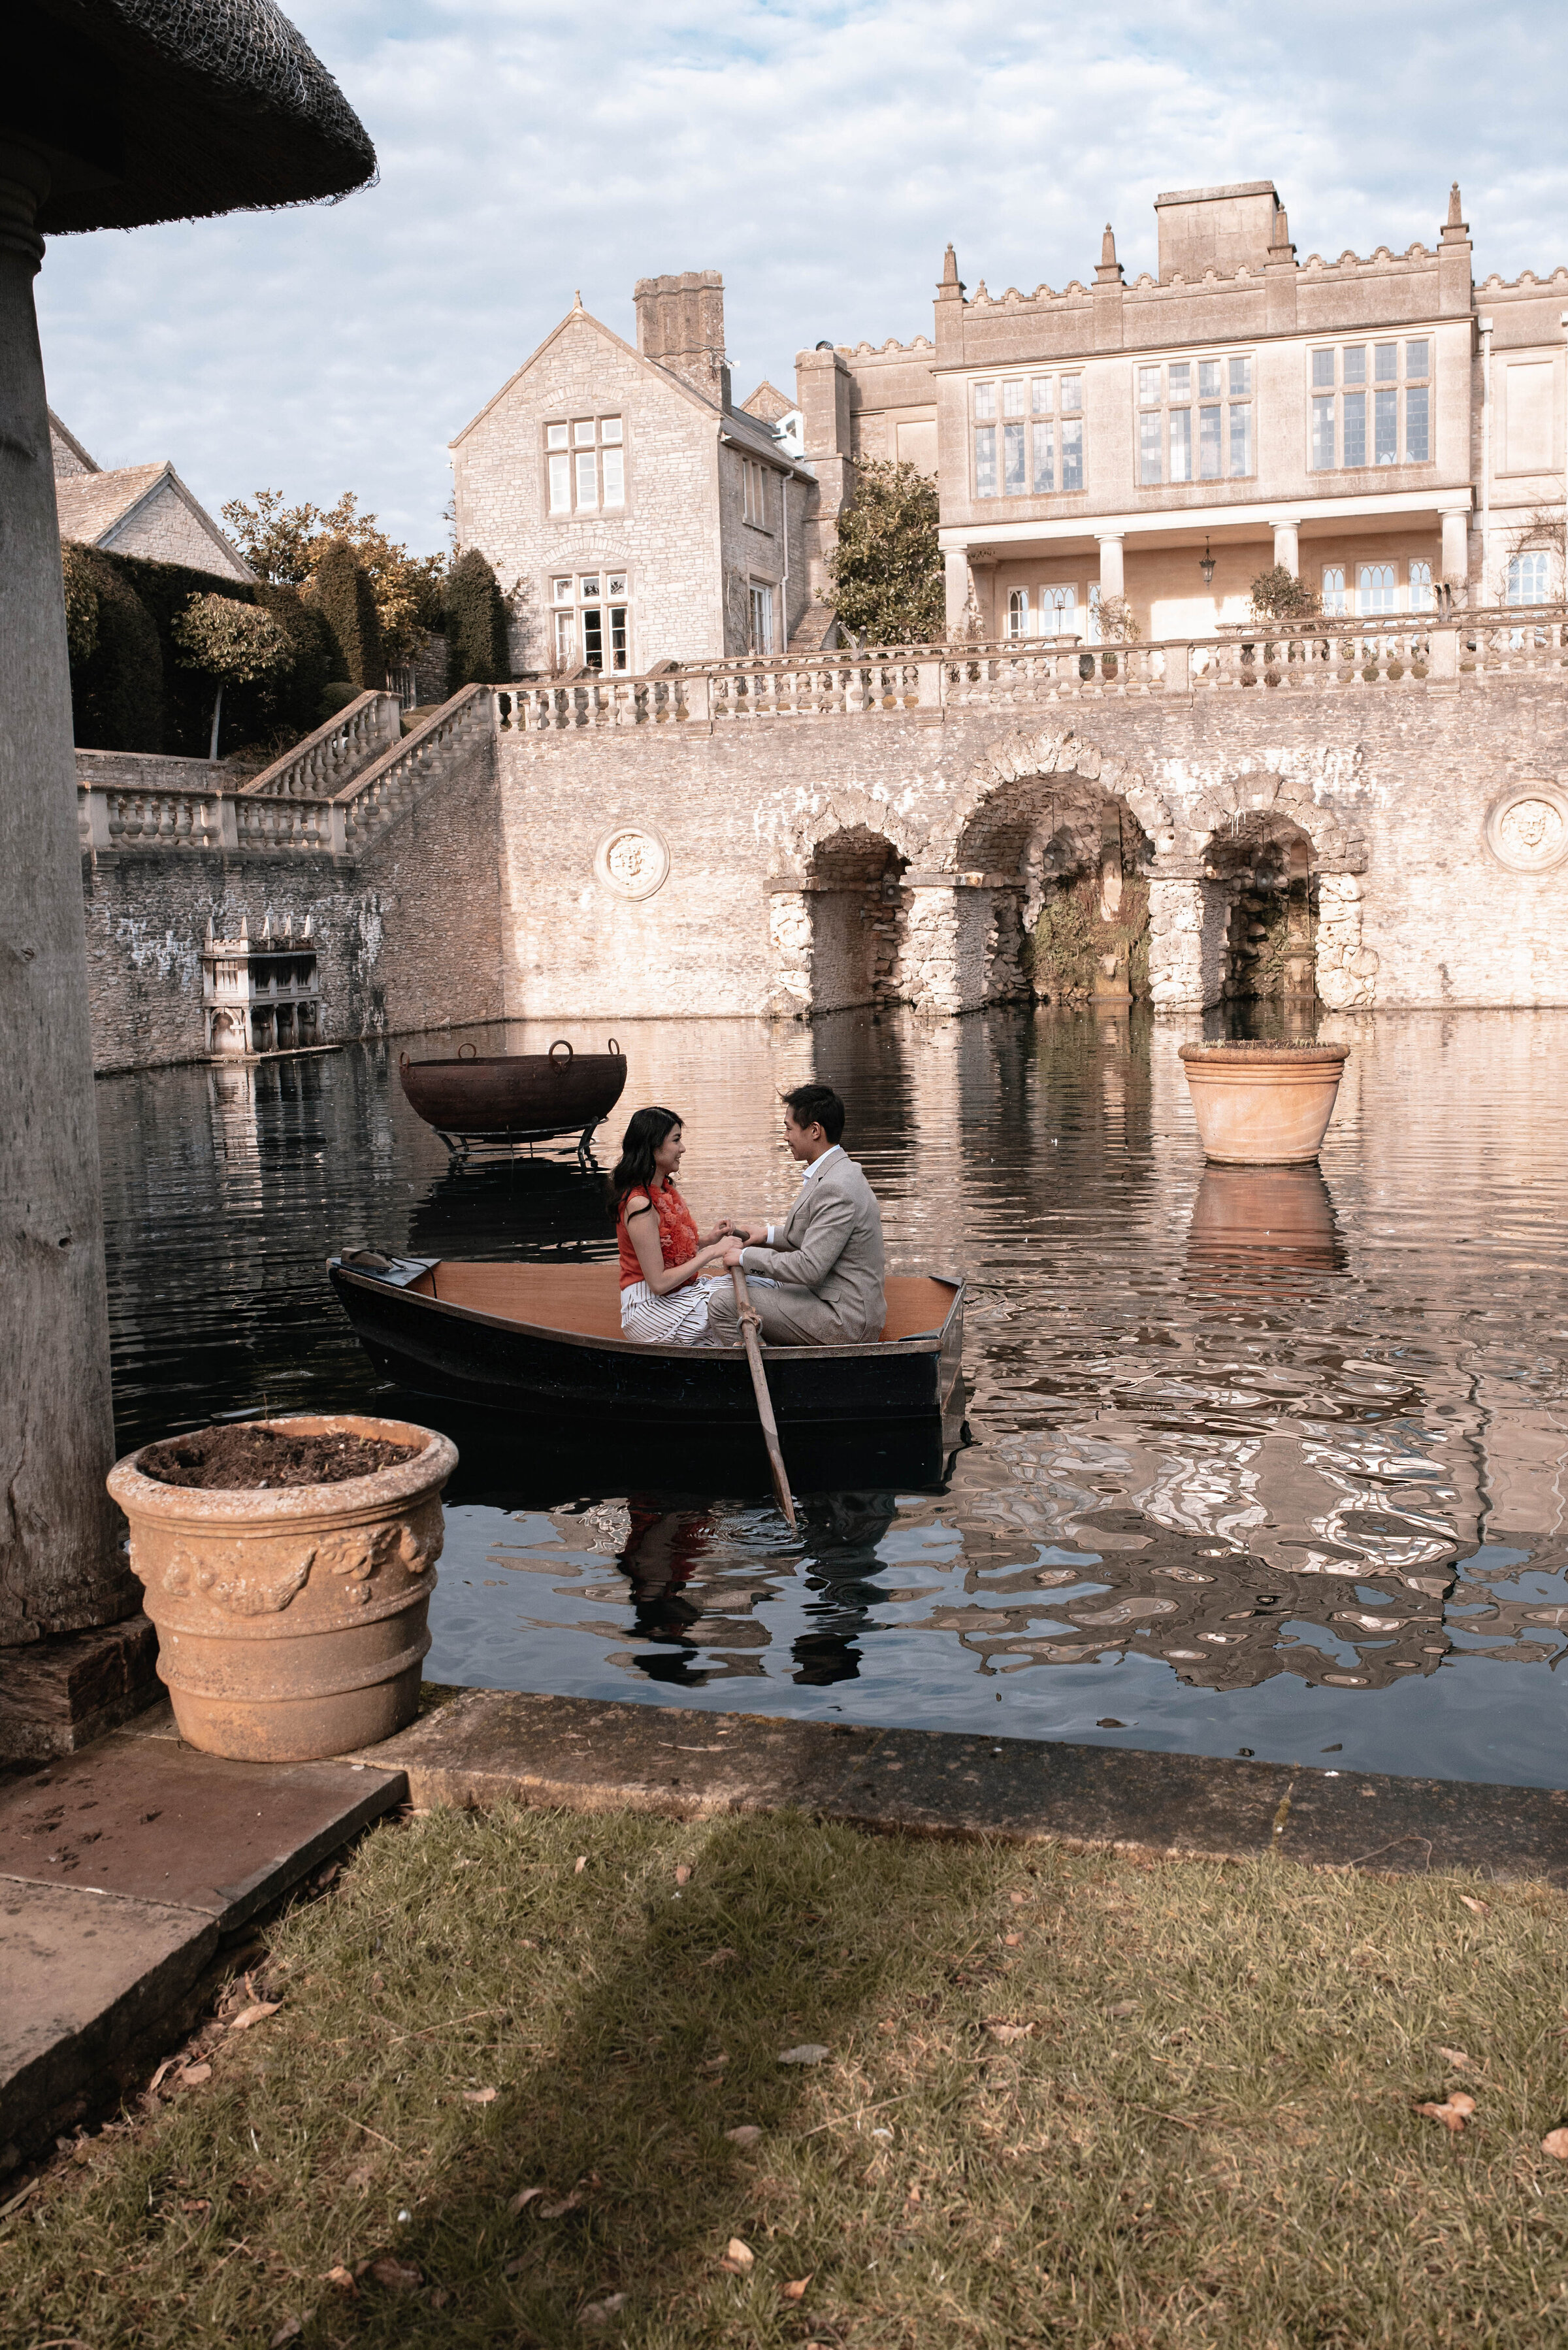 Man and woman on a small rowing boat in the middle of the pond at Euridge Manor wedding venue